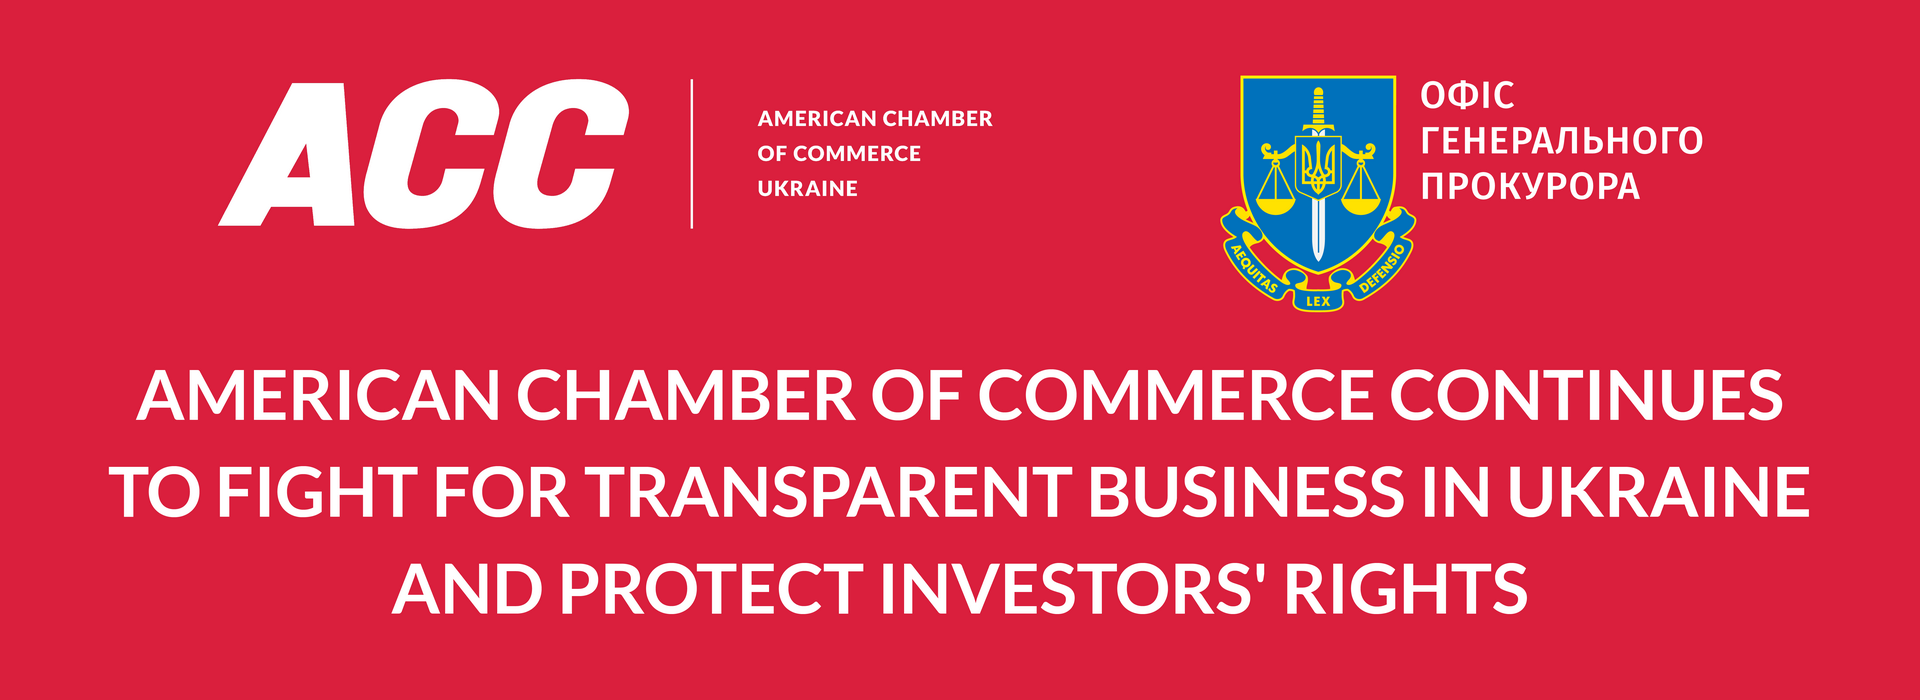 American Chamber of Commerce continues to fight for transparent business in Ukraine and protect investors’ rights